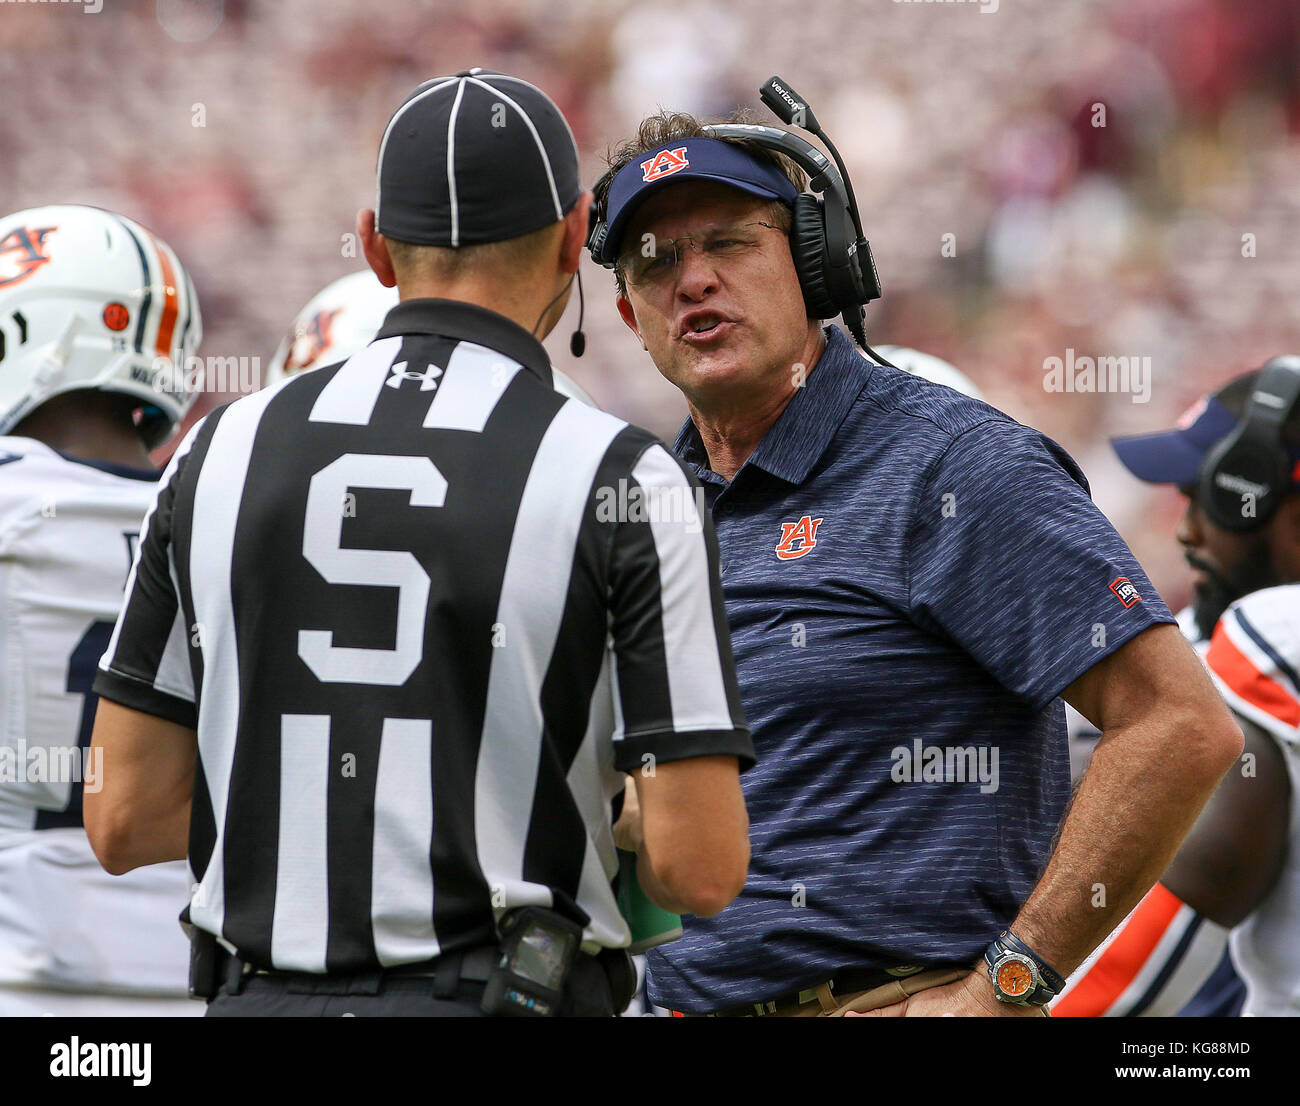 November 4, 2017: Auburn Tigers head coach Gus Malzahn talks to an official in the fourth quarter during the NCAA football game between the Auburn Tigers and the Texas A&M Aggies at Kyle Field in College Station, TX; John Glaser/CSM. Stock Photo